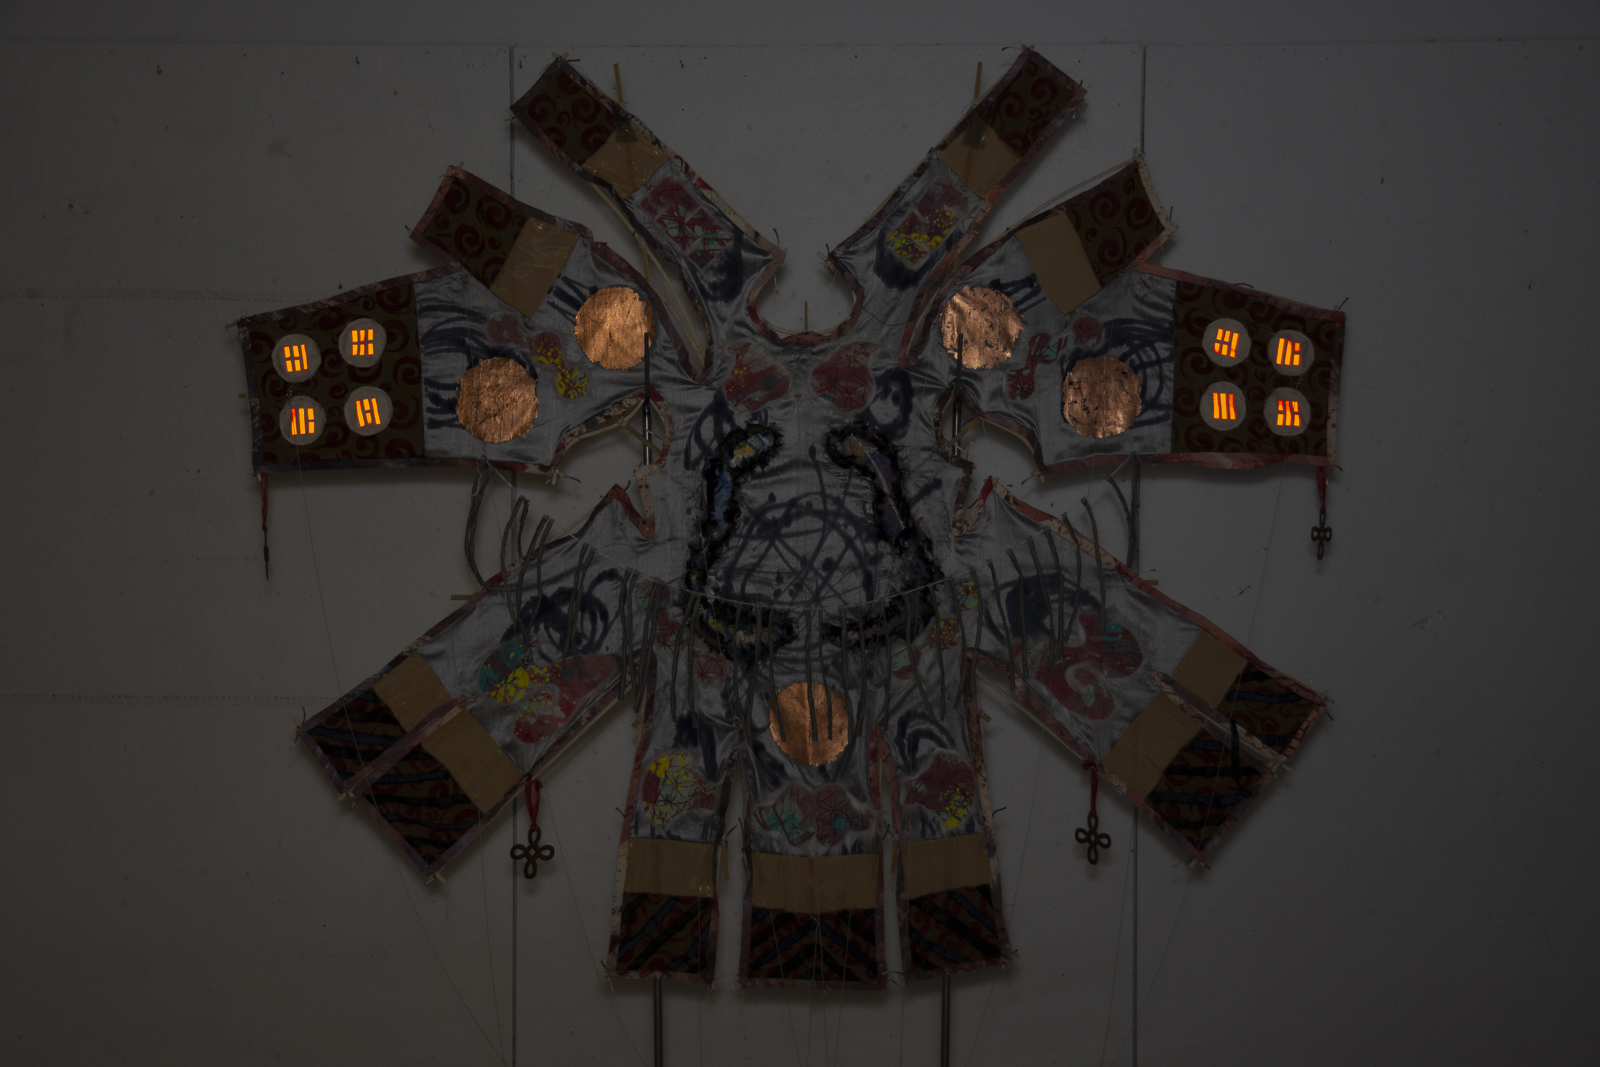 The kite is captured with a flash photo such that the copper foil and daoist bagua symbols glow.